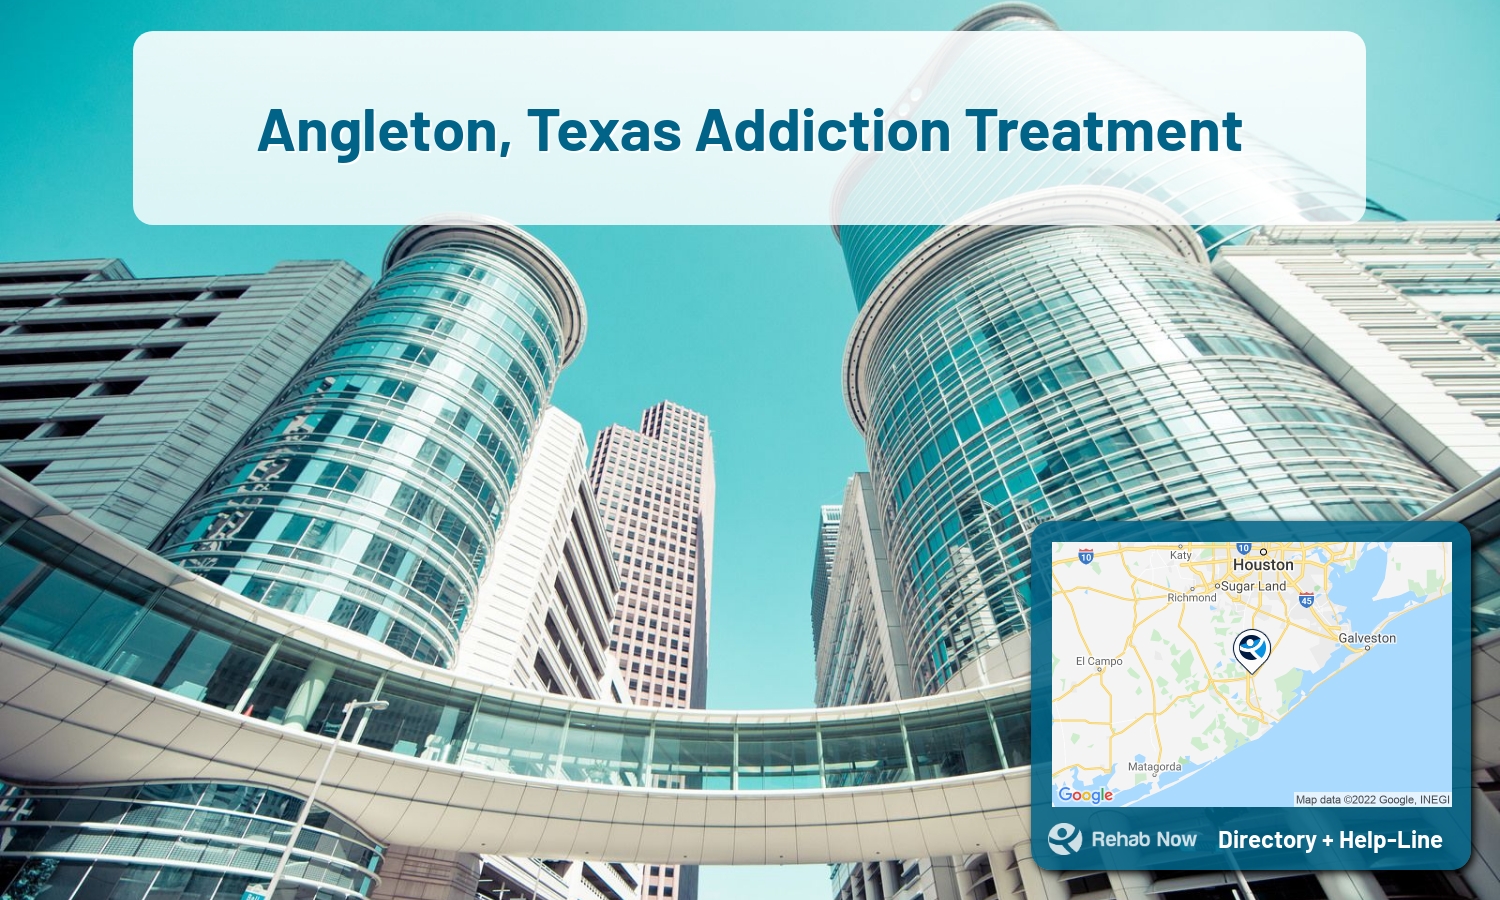 Angleton, TX Treatment Centers. Find drug rehab in Angleton, Texas, or detox and treatment programs. Get the right help now!